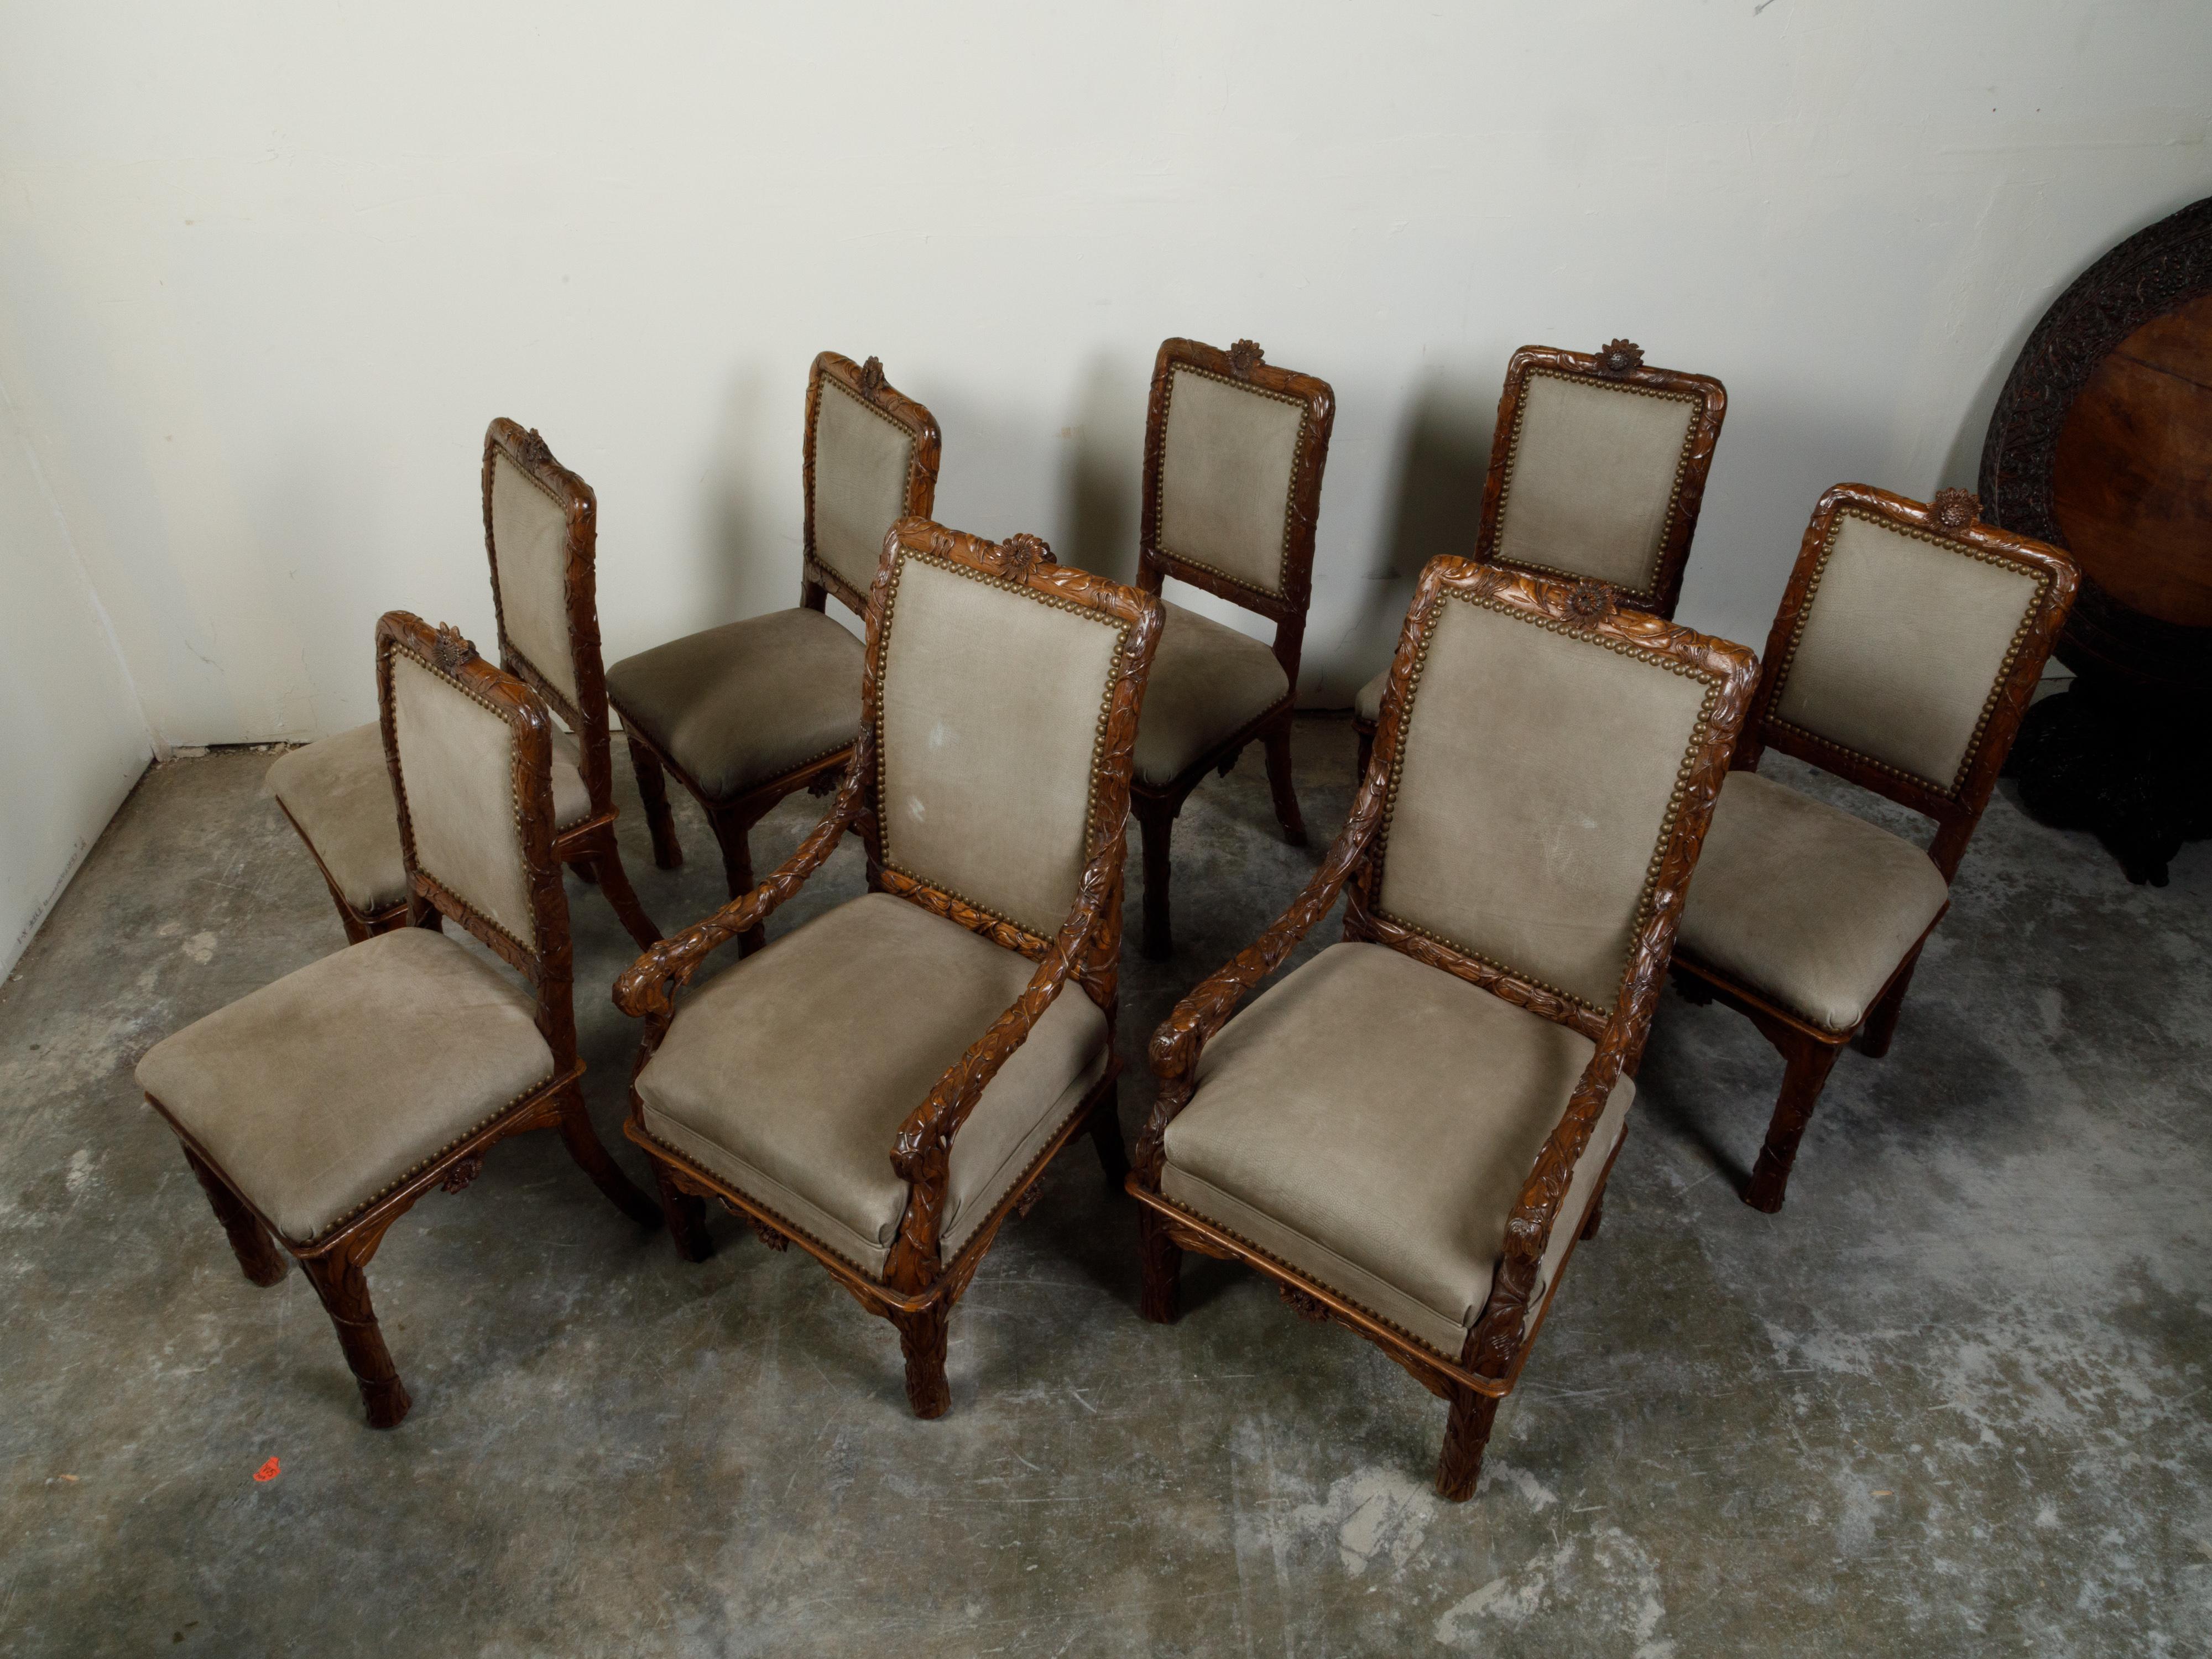 Set of Eight 1920s Black Forest Dining Room Chairs with Hand-Carved Floral Décor In Good Condition For Sale In Atlanta, GA